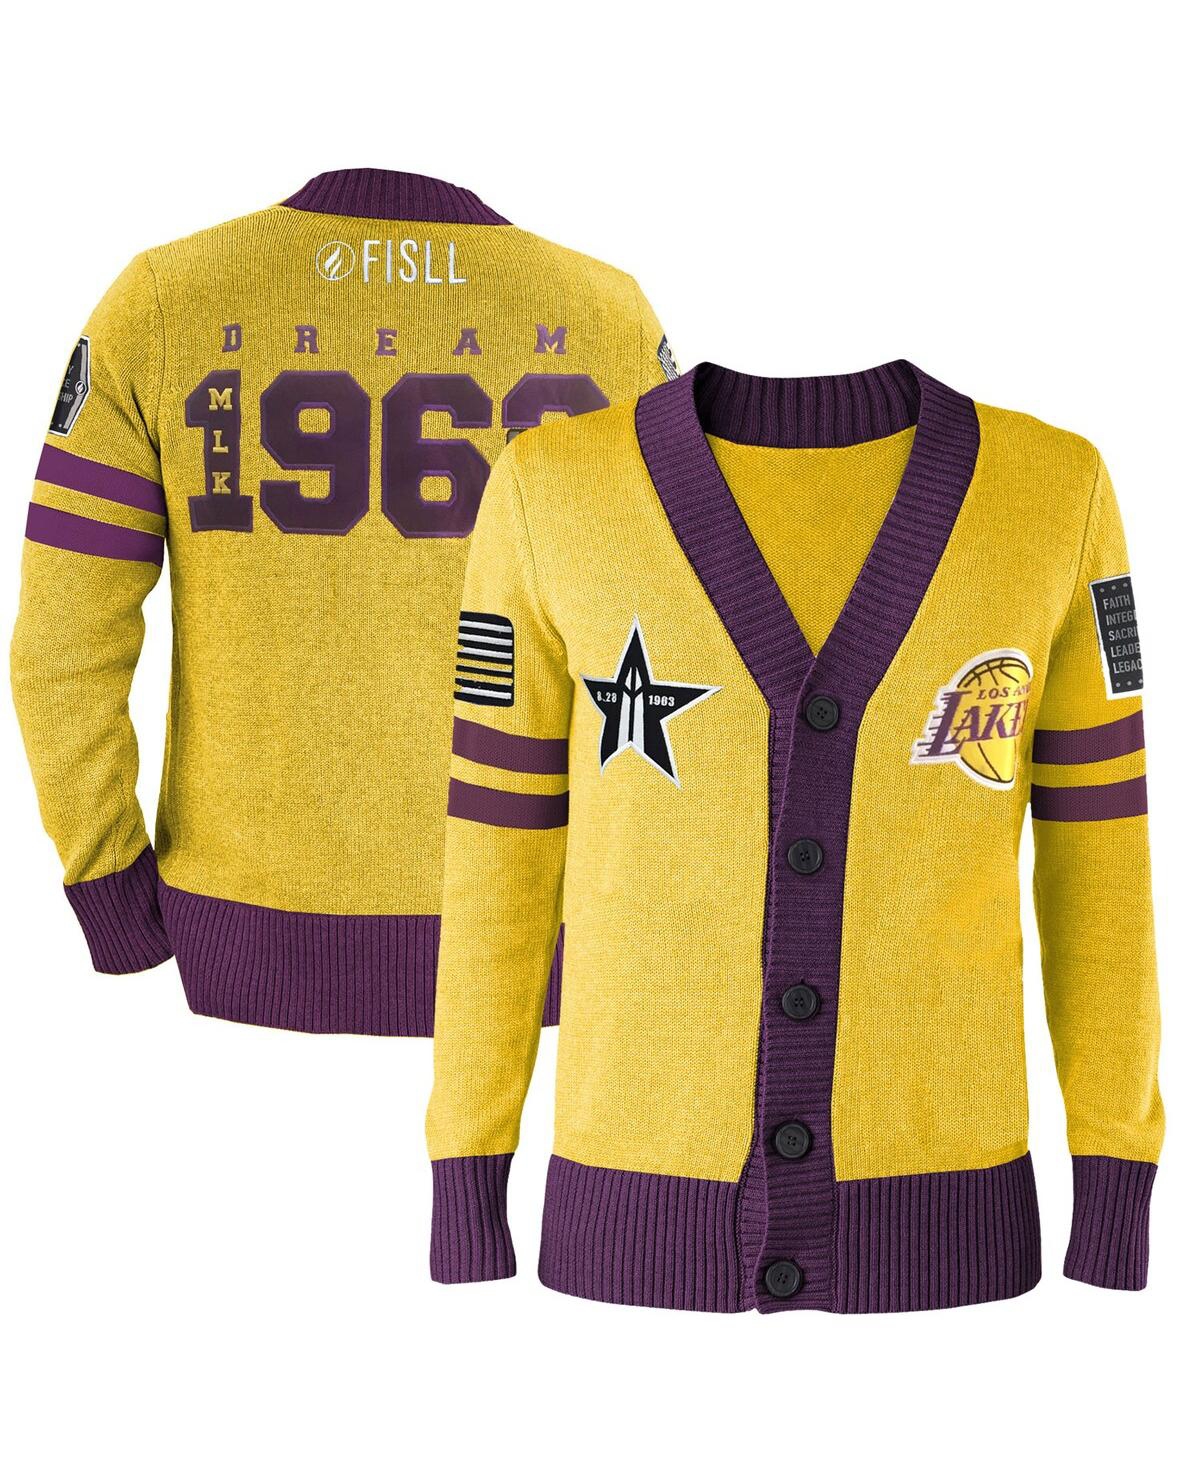 Men's and Women's Fisll x Black History Collection Gold Los Angeles Lakers Full-Button Cardigan Sweater - Gold, Purple